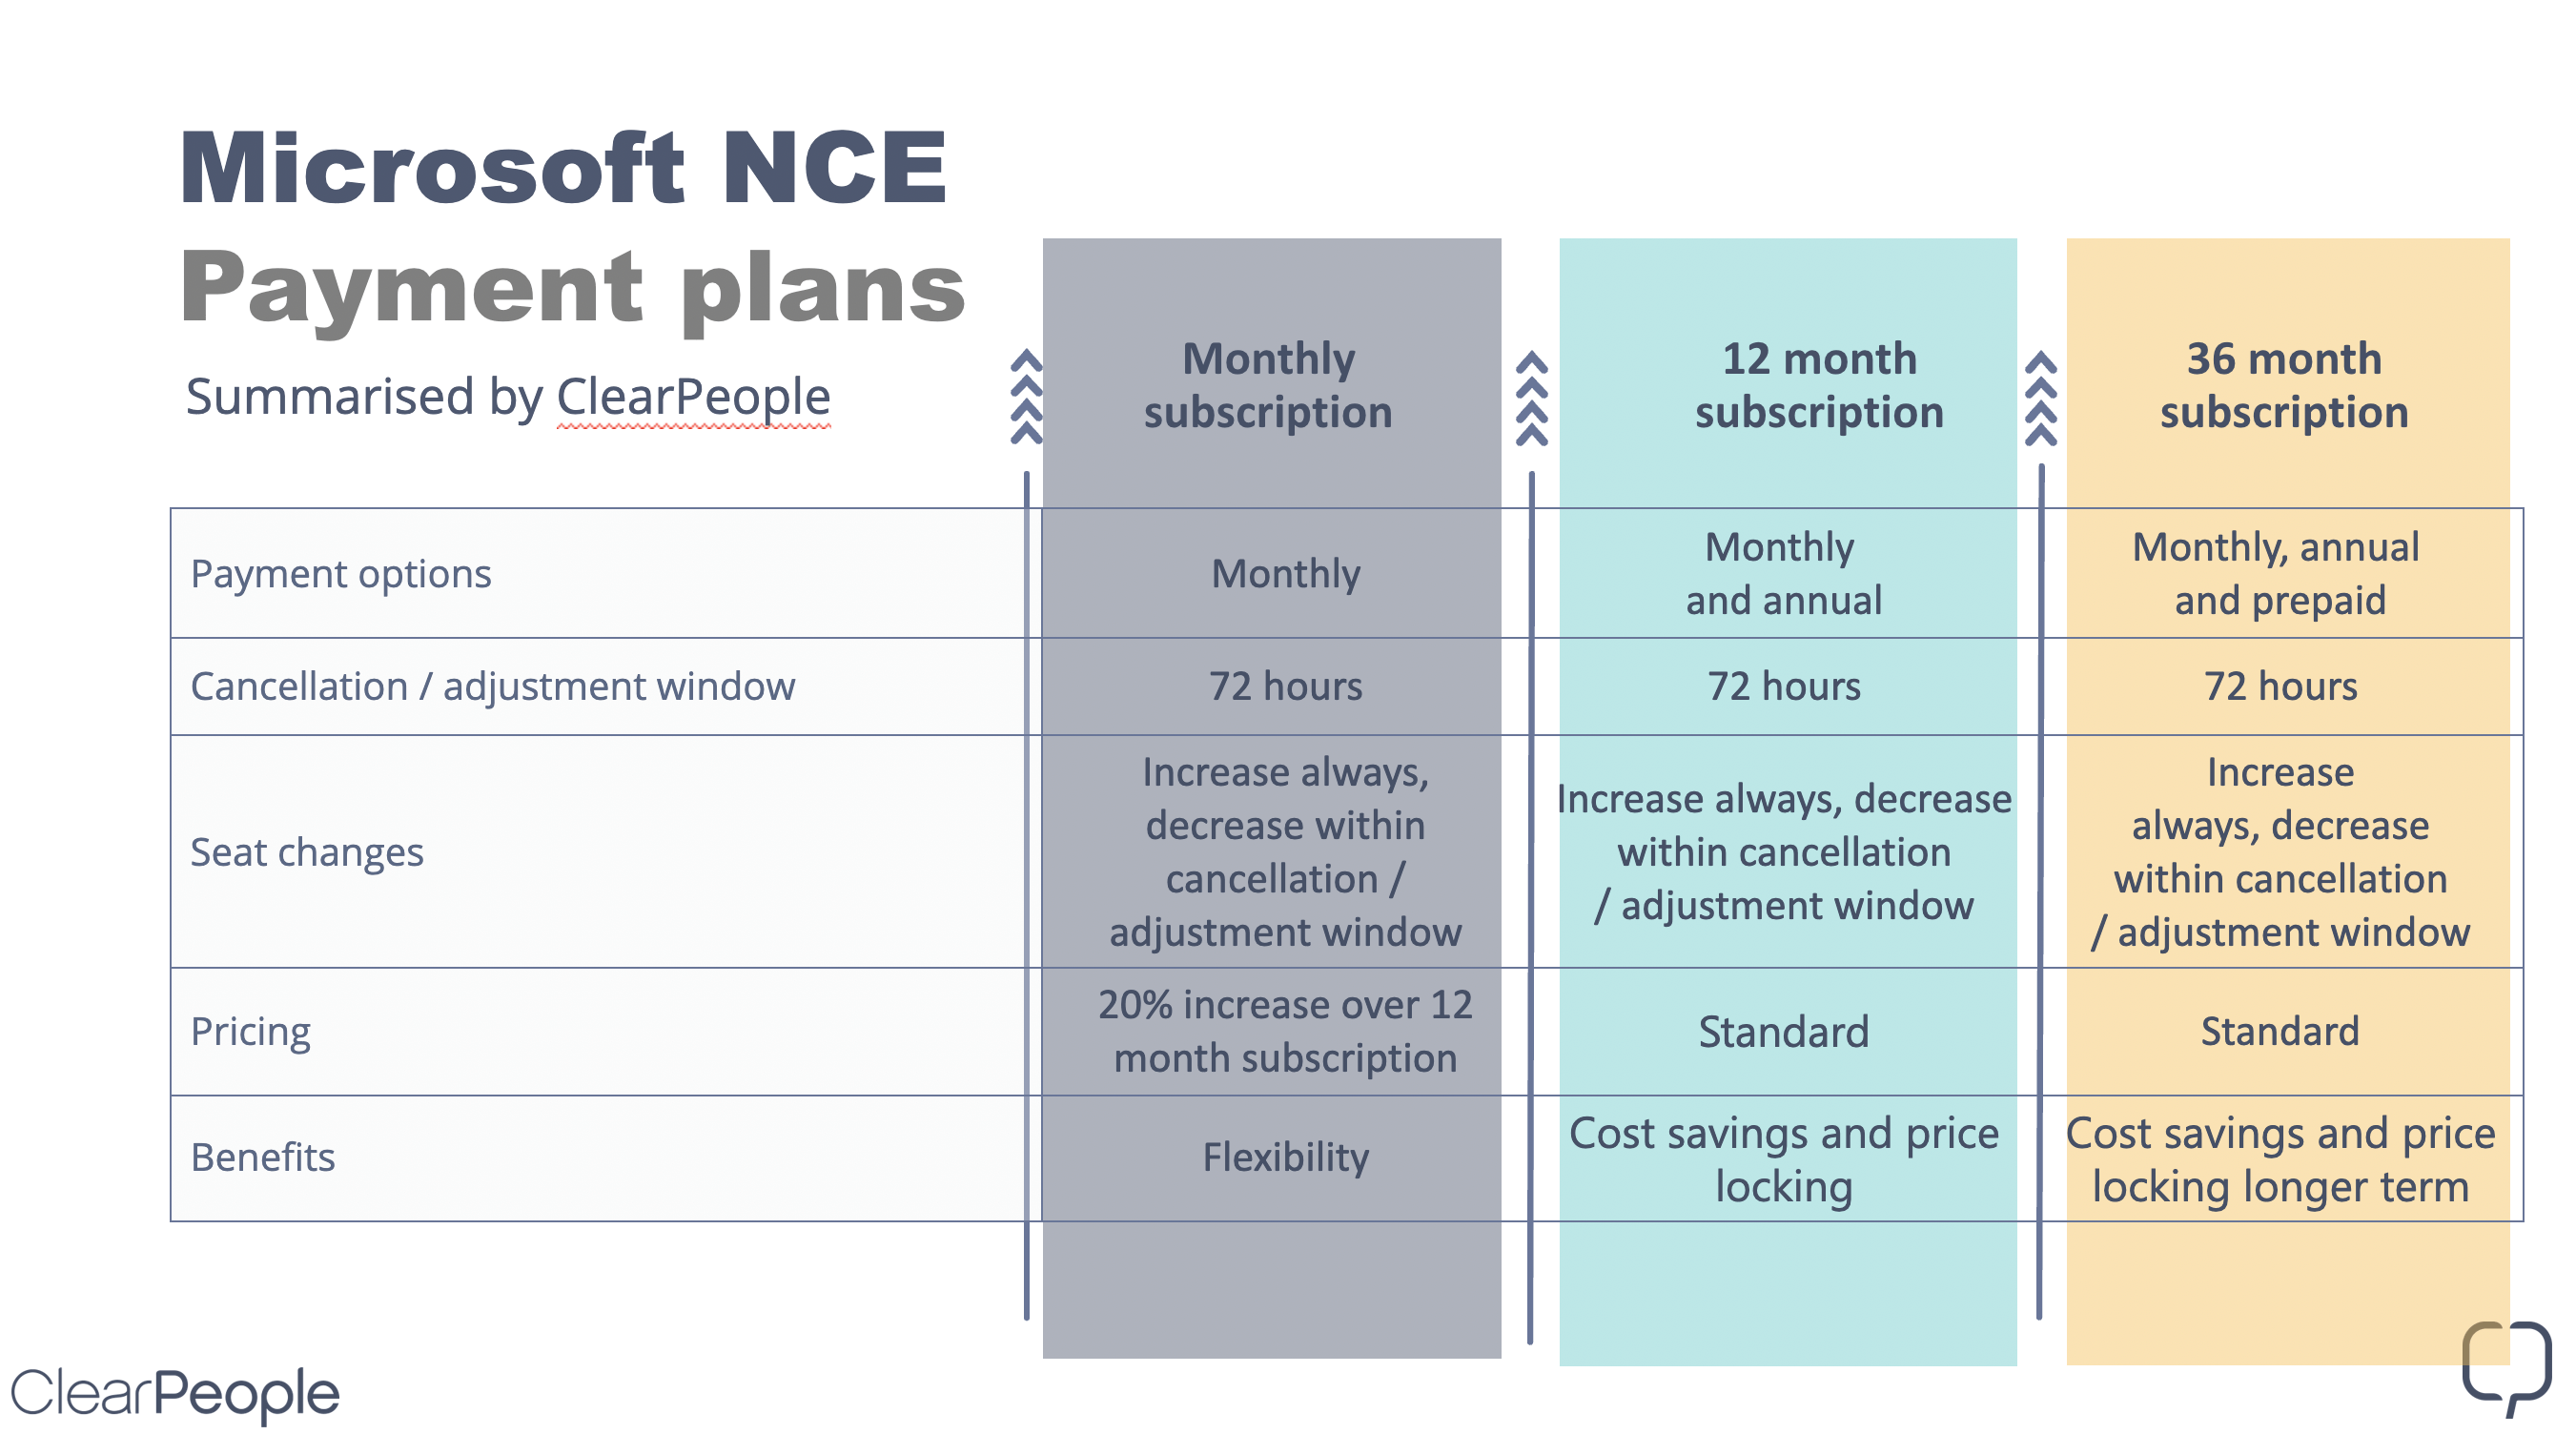 Microsoft New Commerce Experience payment plans summary by ClearPeople